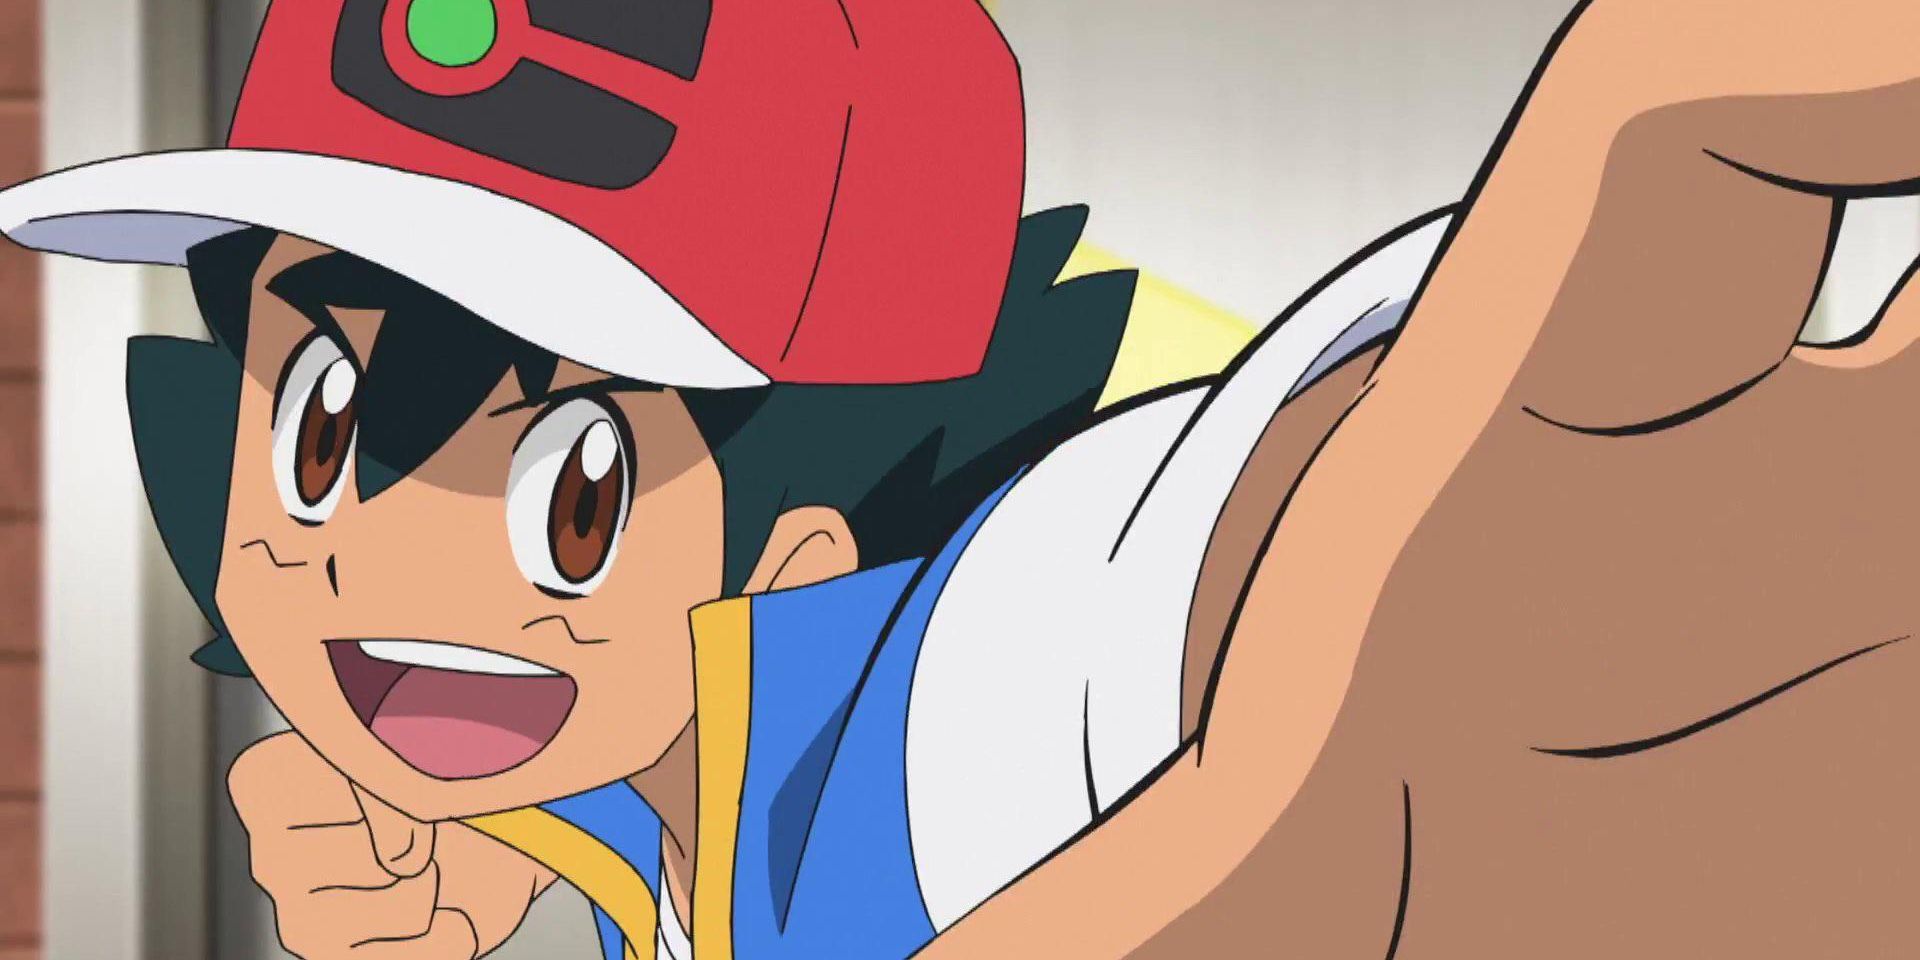 Ash Ketchum pumped and excited in the Pokemon anime